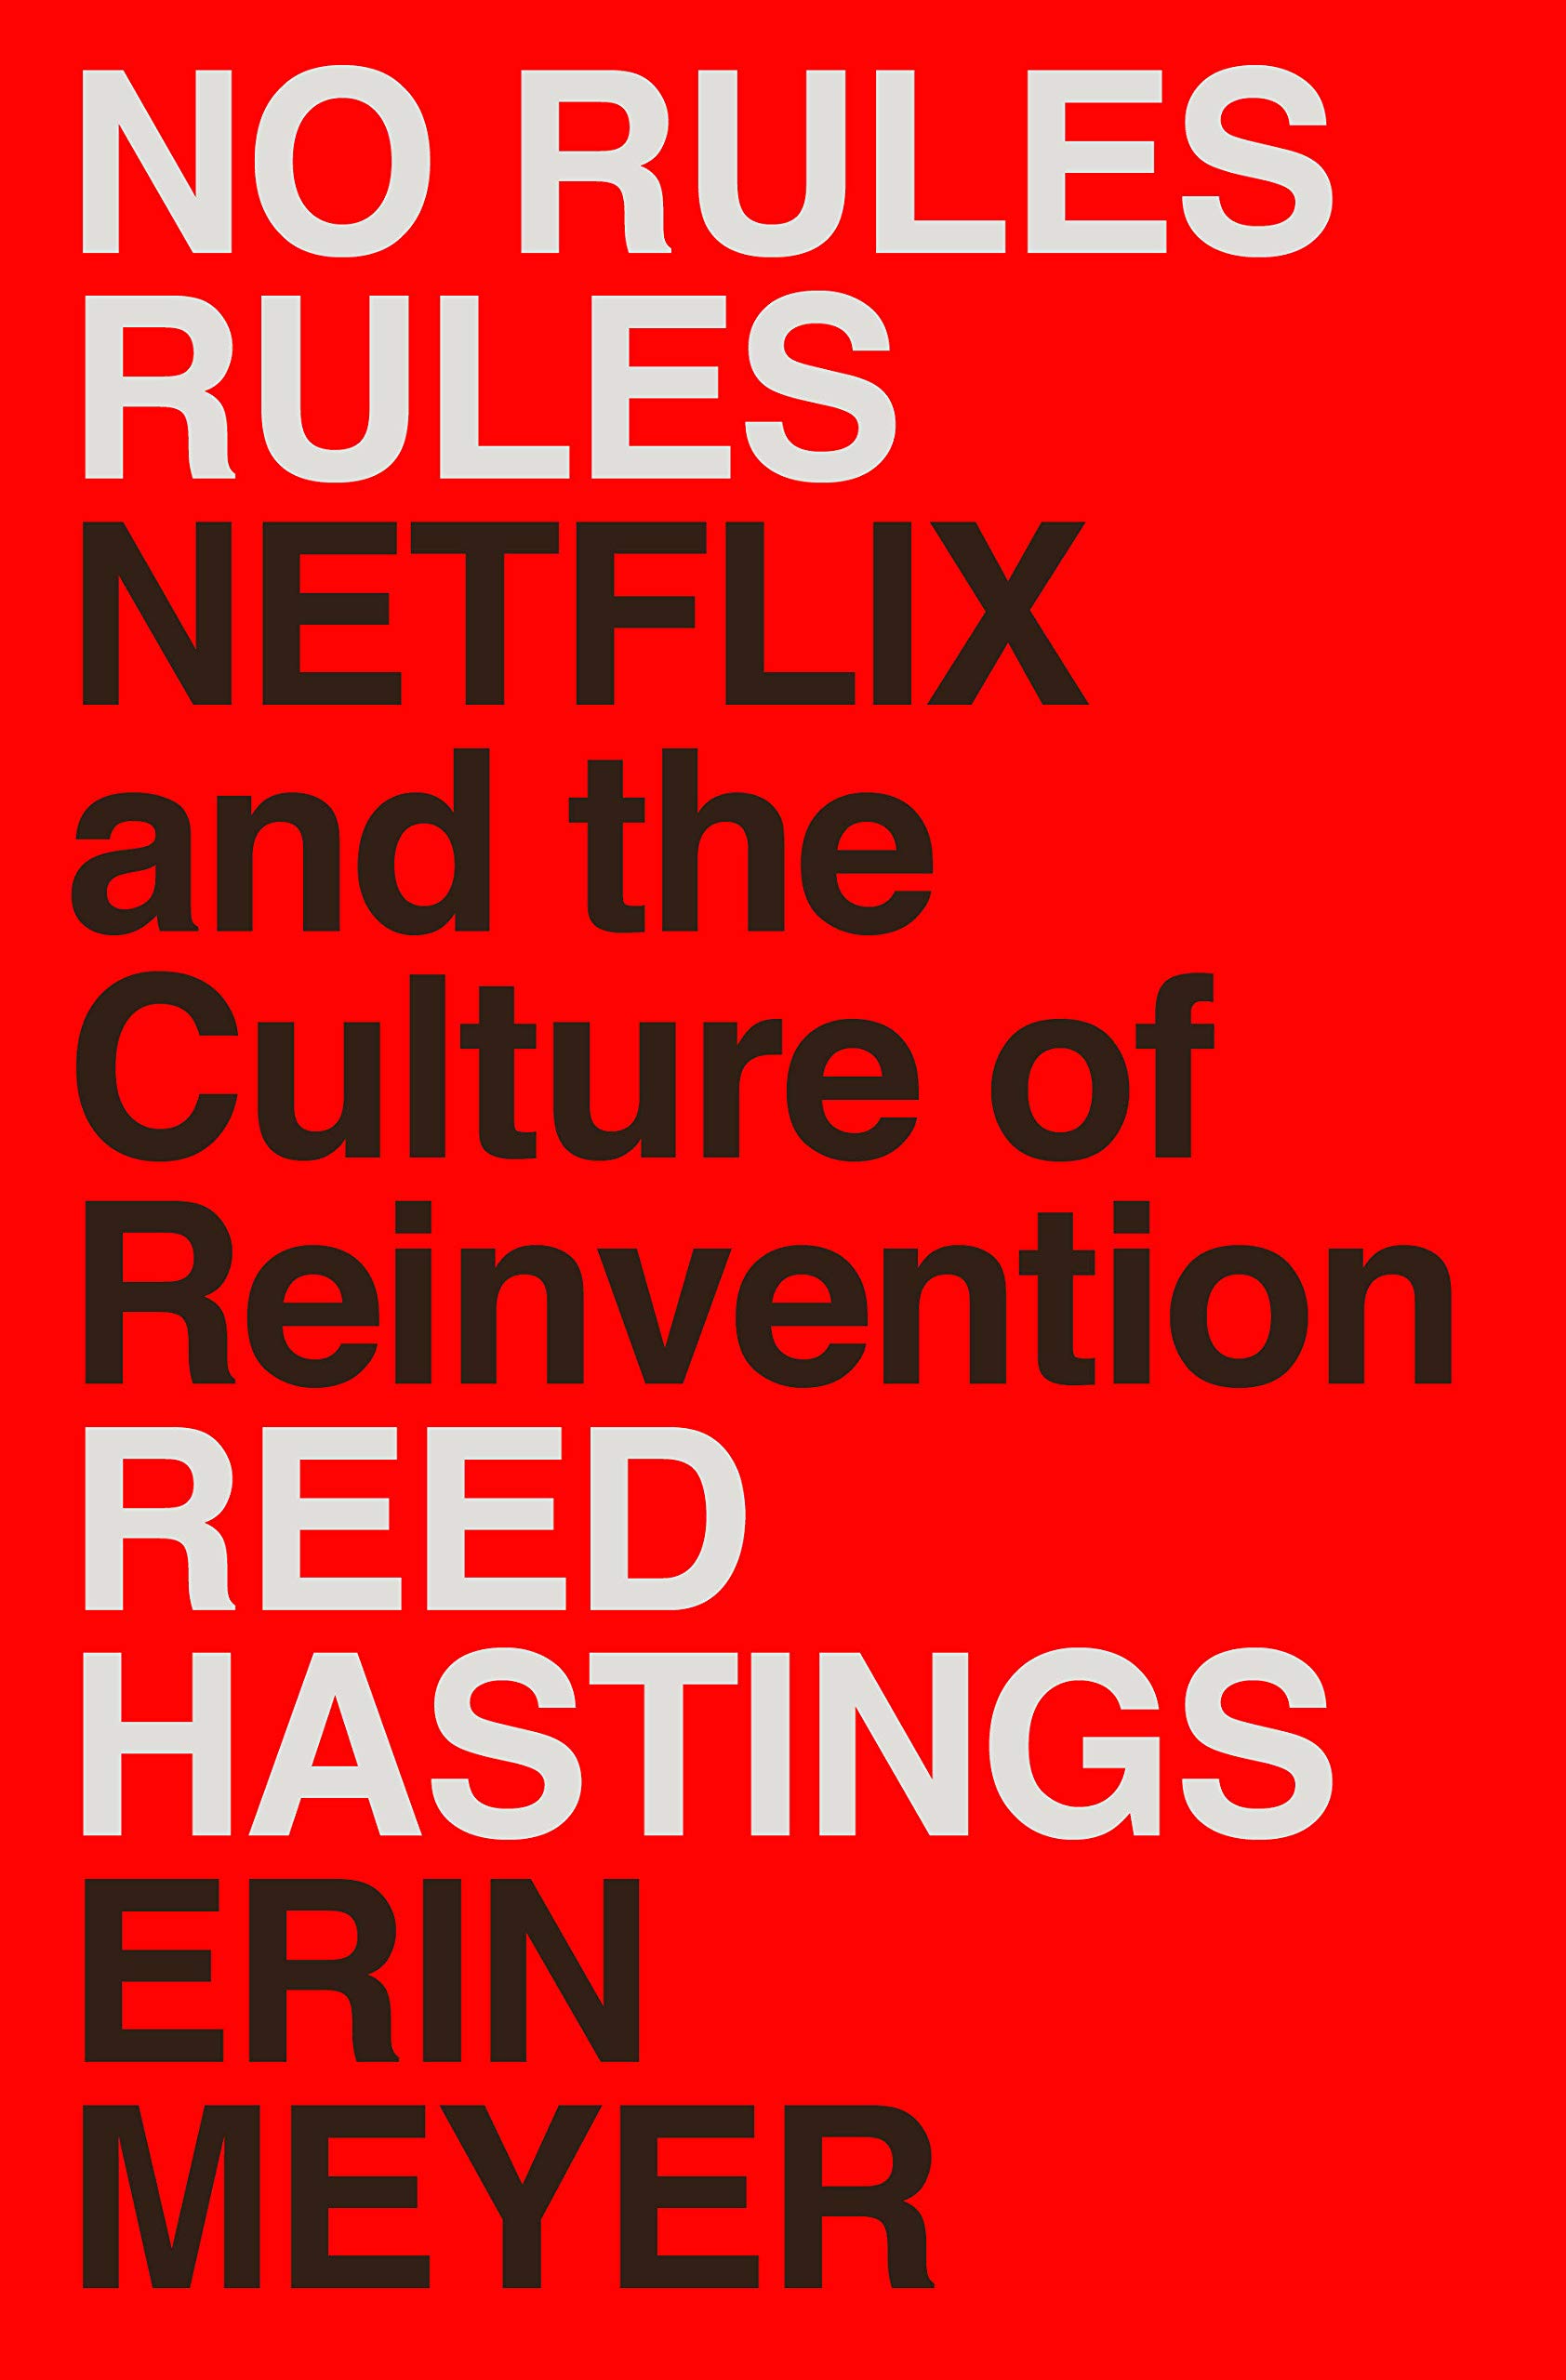 No Rules Rules by Reed Hastings and Erin Meyer